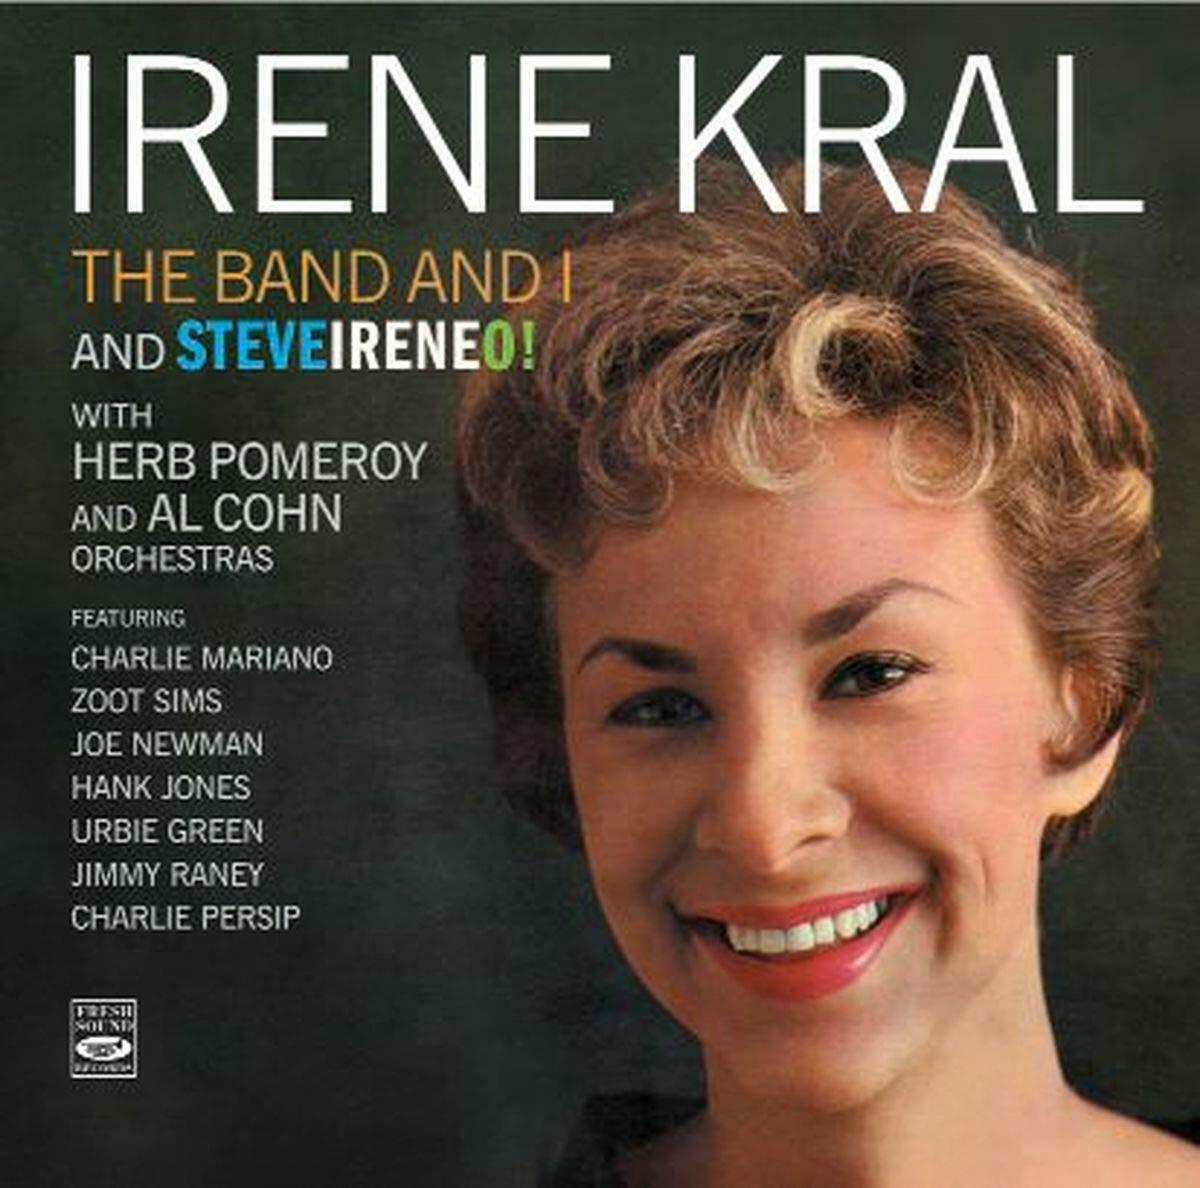 Irene Kral The Band And I + Steveireneo (2 LP On 1 CD)